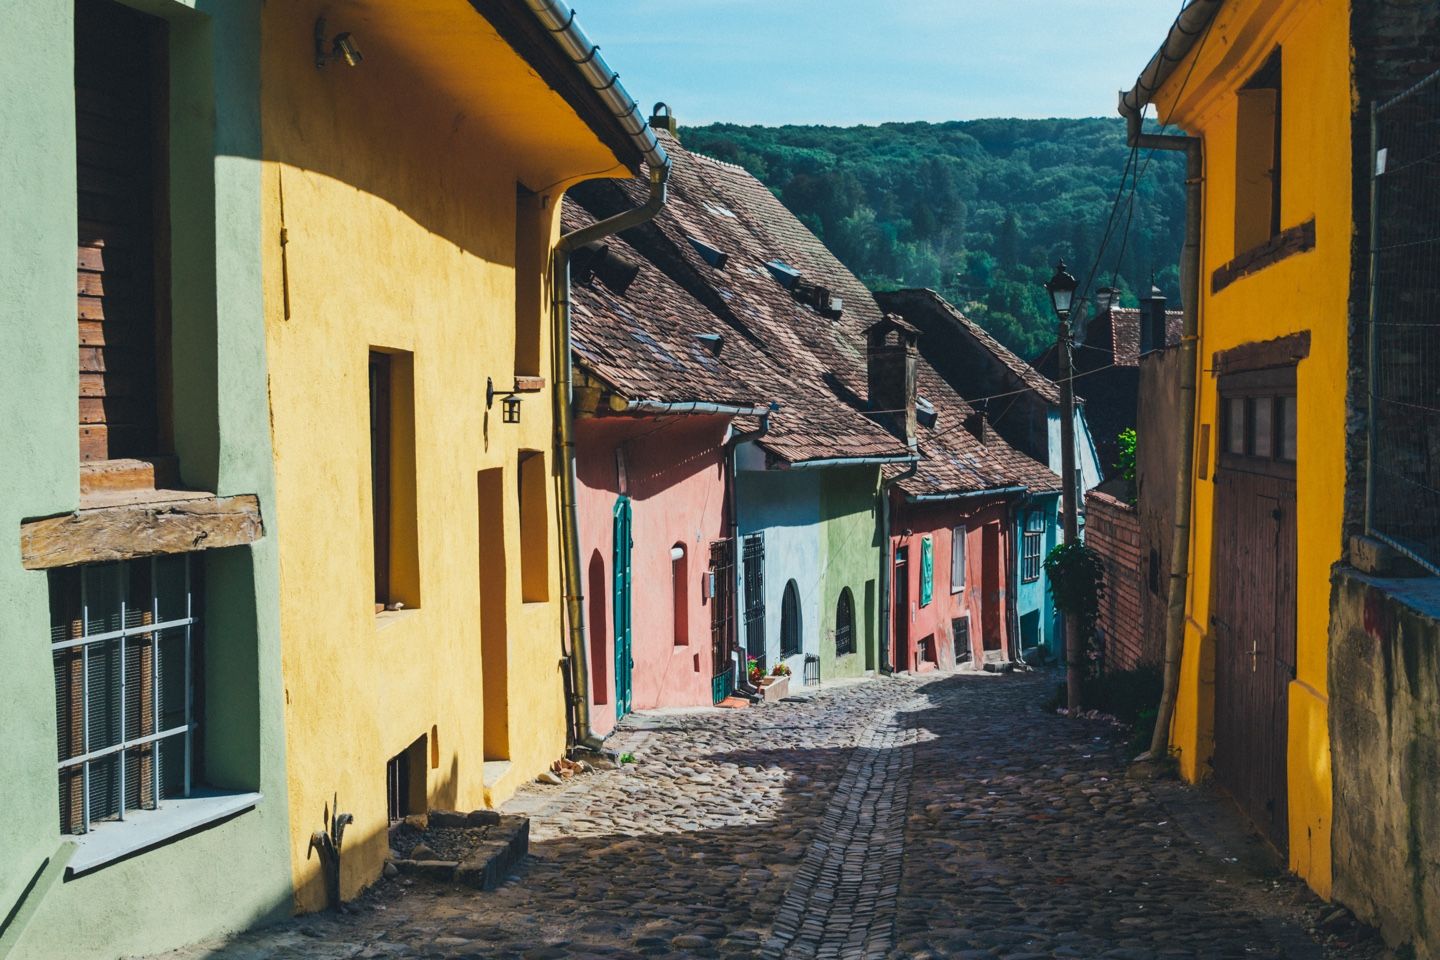 A Spanish street with colorful houses